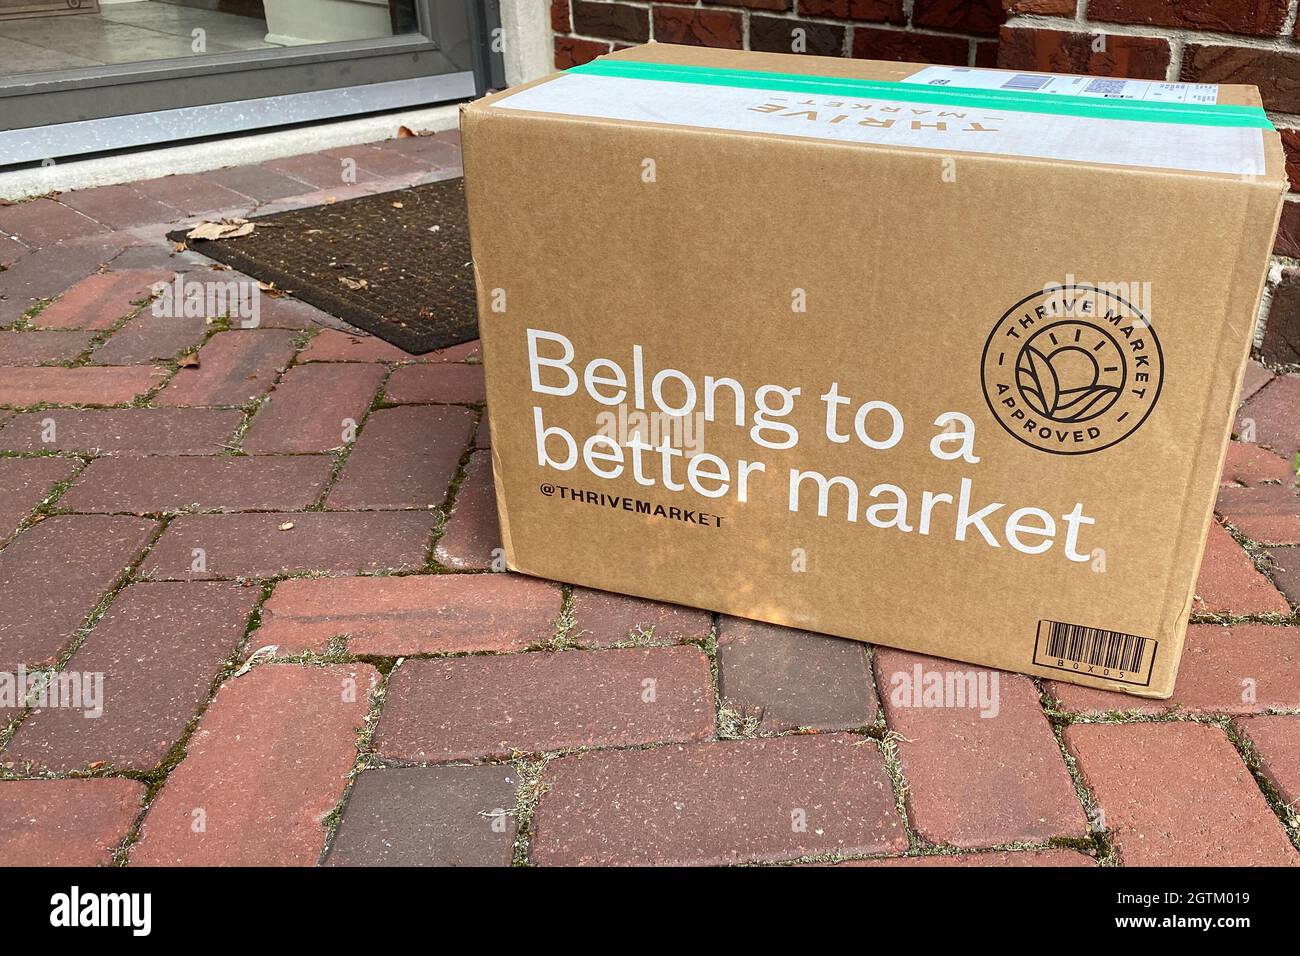 Delivery at the front door of a box from Thrive Market, an online grocer Stock Photo